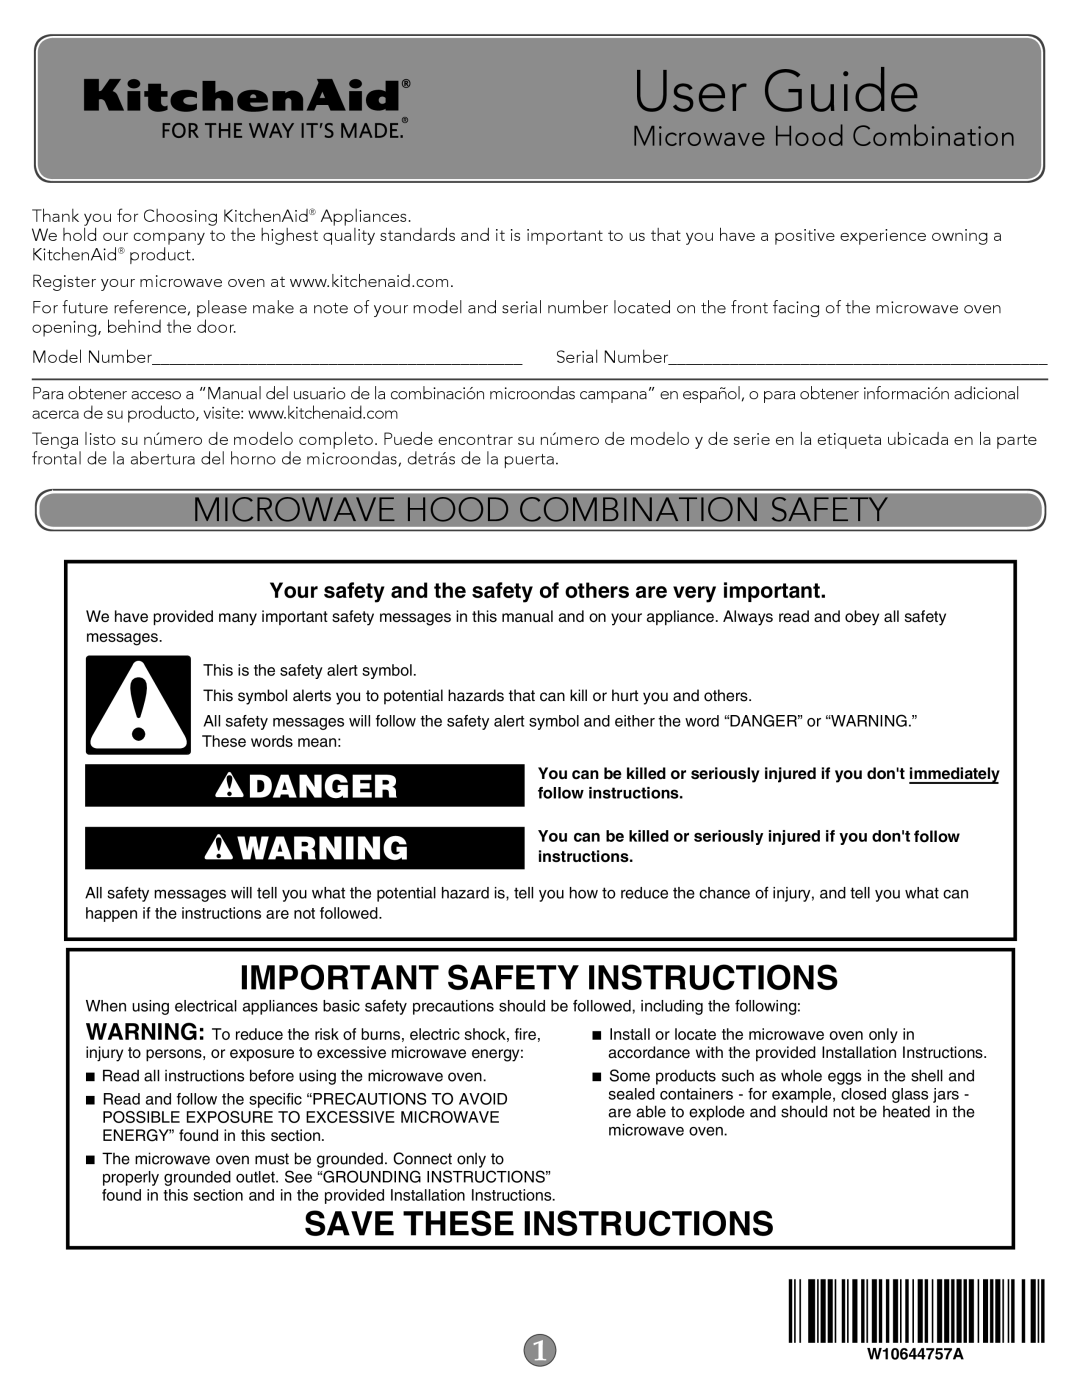 KitchenAid W10644757A important safety instructions Microwave Hood Combination Safety, Important Safety Instructions 